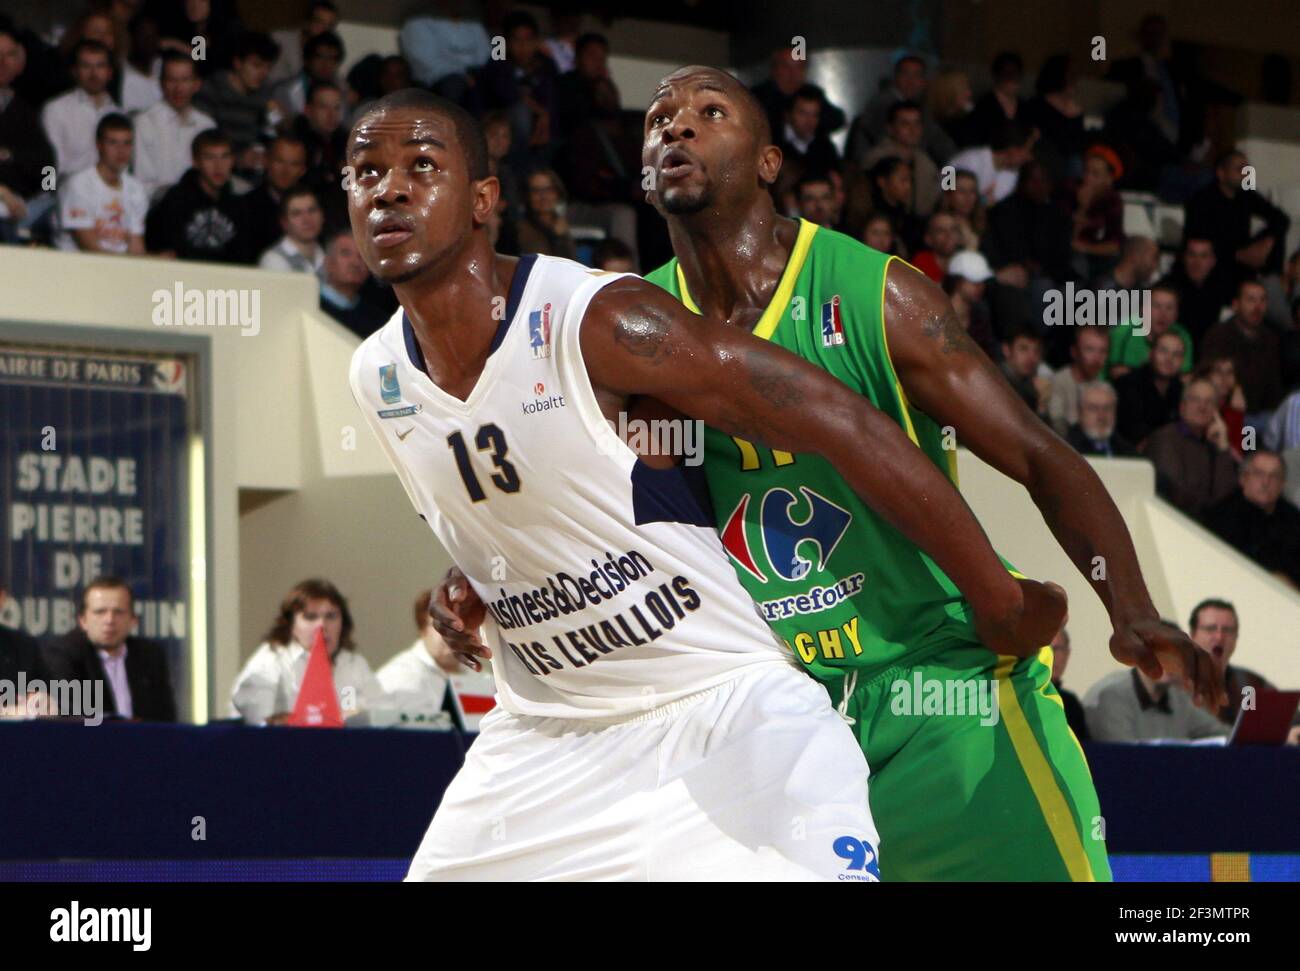 BASKETBALL - FRENCH CHAMPIONSHIP PRO A 2009/2010 - LEVALLOIS-PERRET (FRA) -  24/11/2009 - PHOTO : HERVE BELLENGER / DPPIPARIS LEVALLOIS V VICHY - LAQUAN  PROWELL (PARIS LEVALLOIS Stock Photo - Alamy